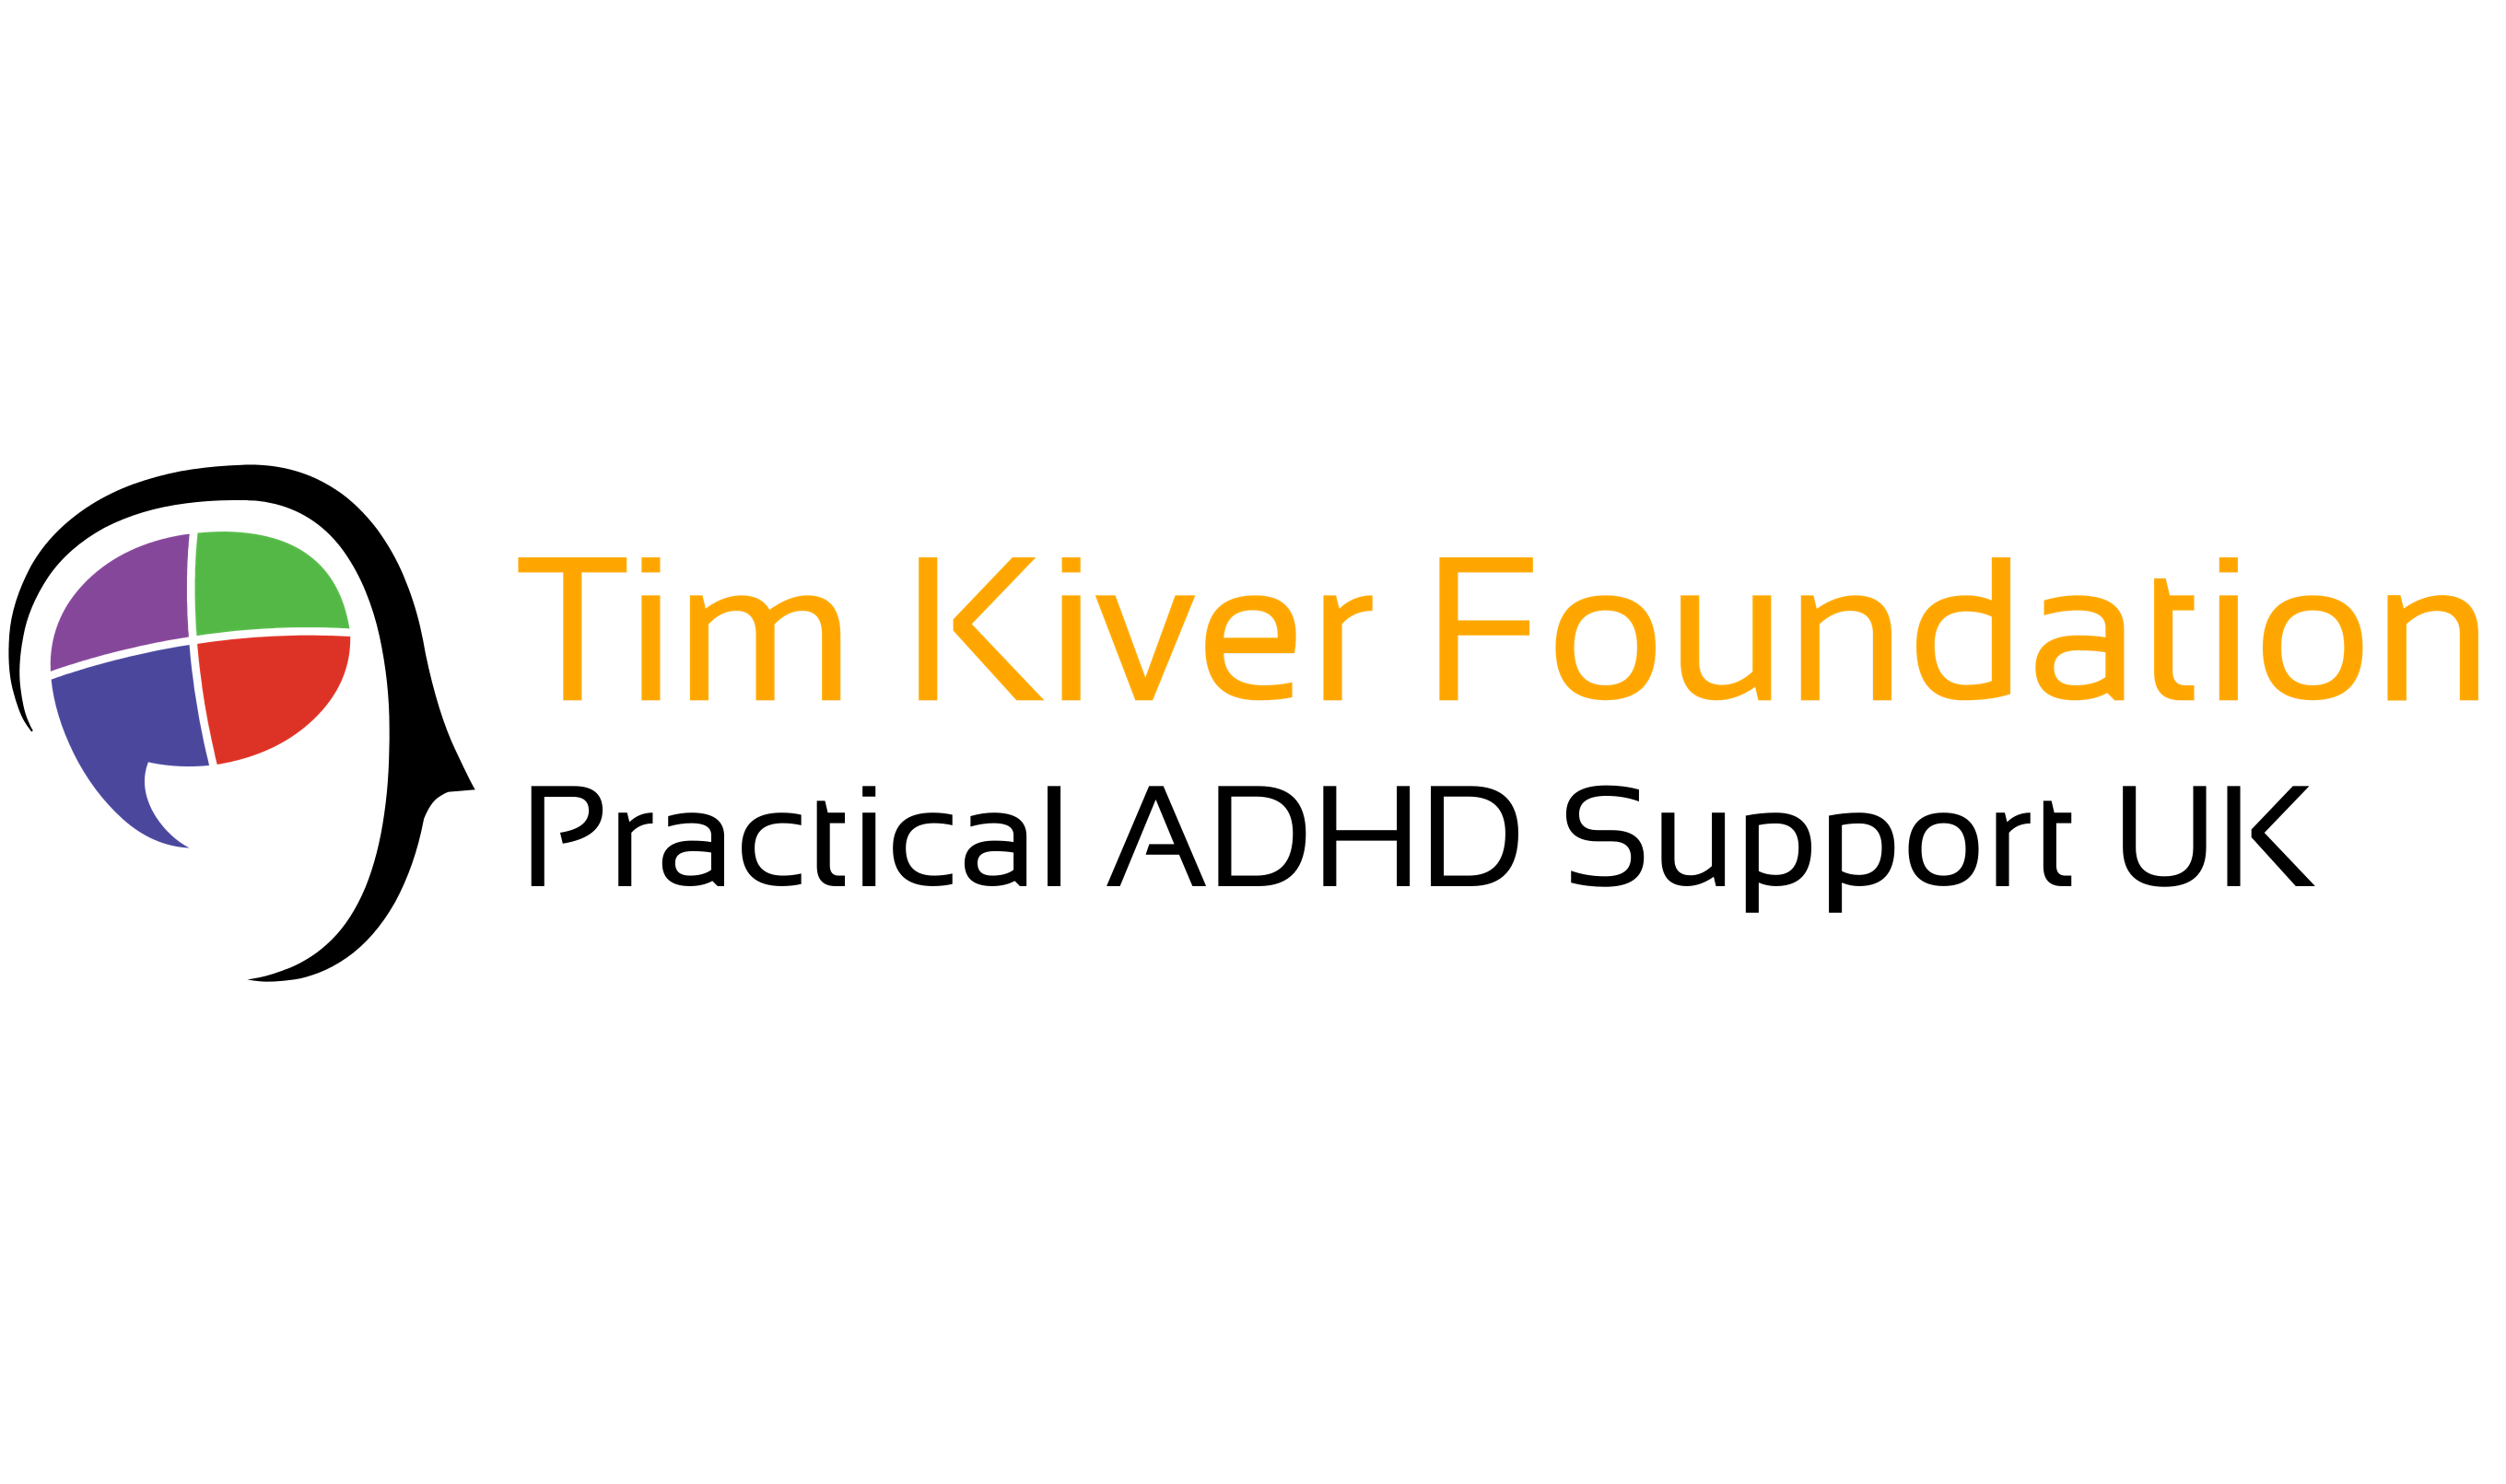 ADHD Support Group - Southampton Area